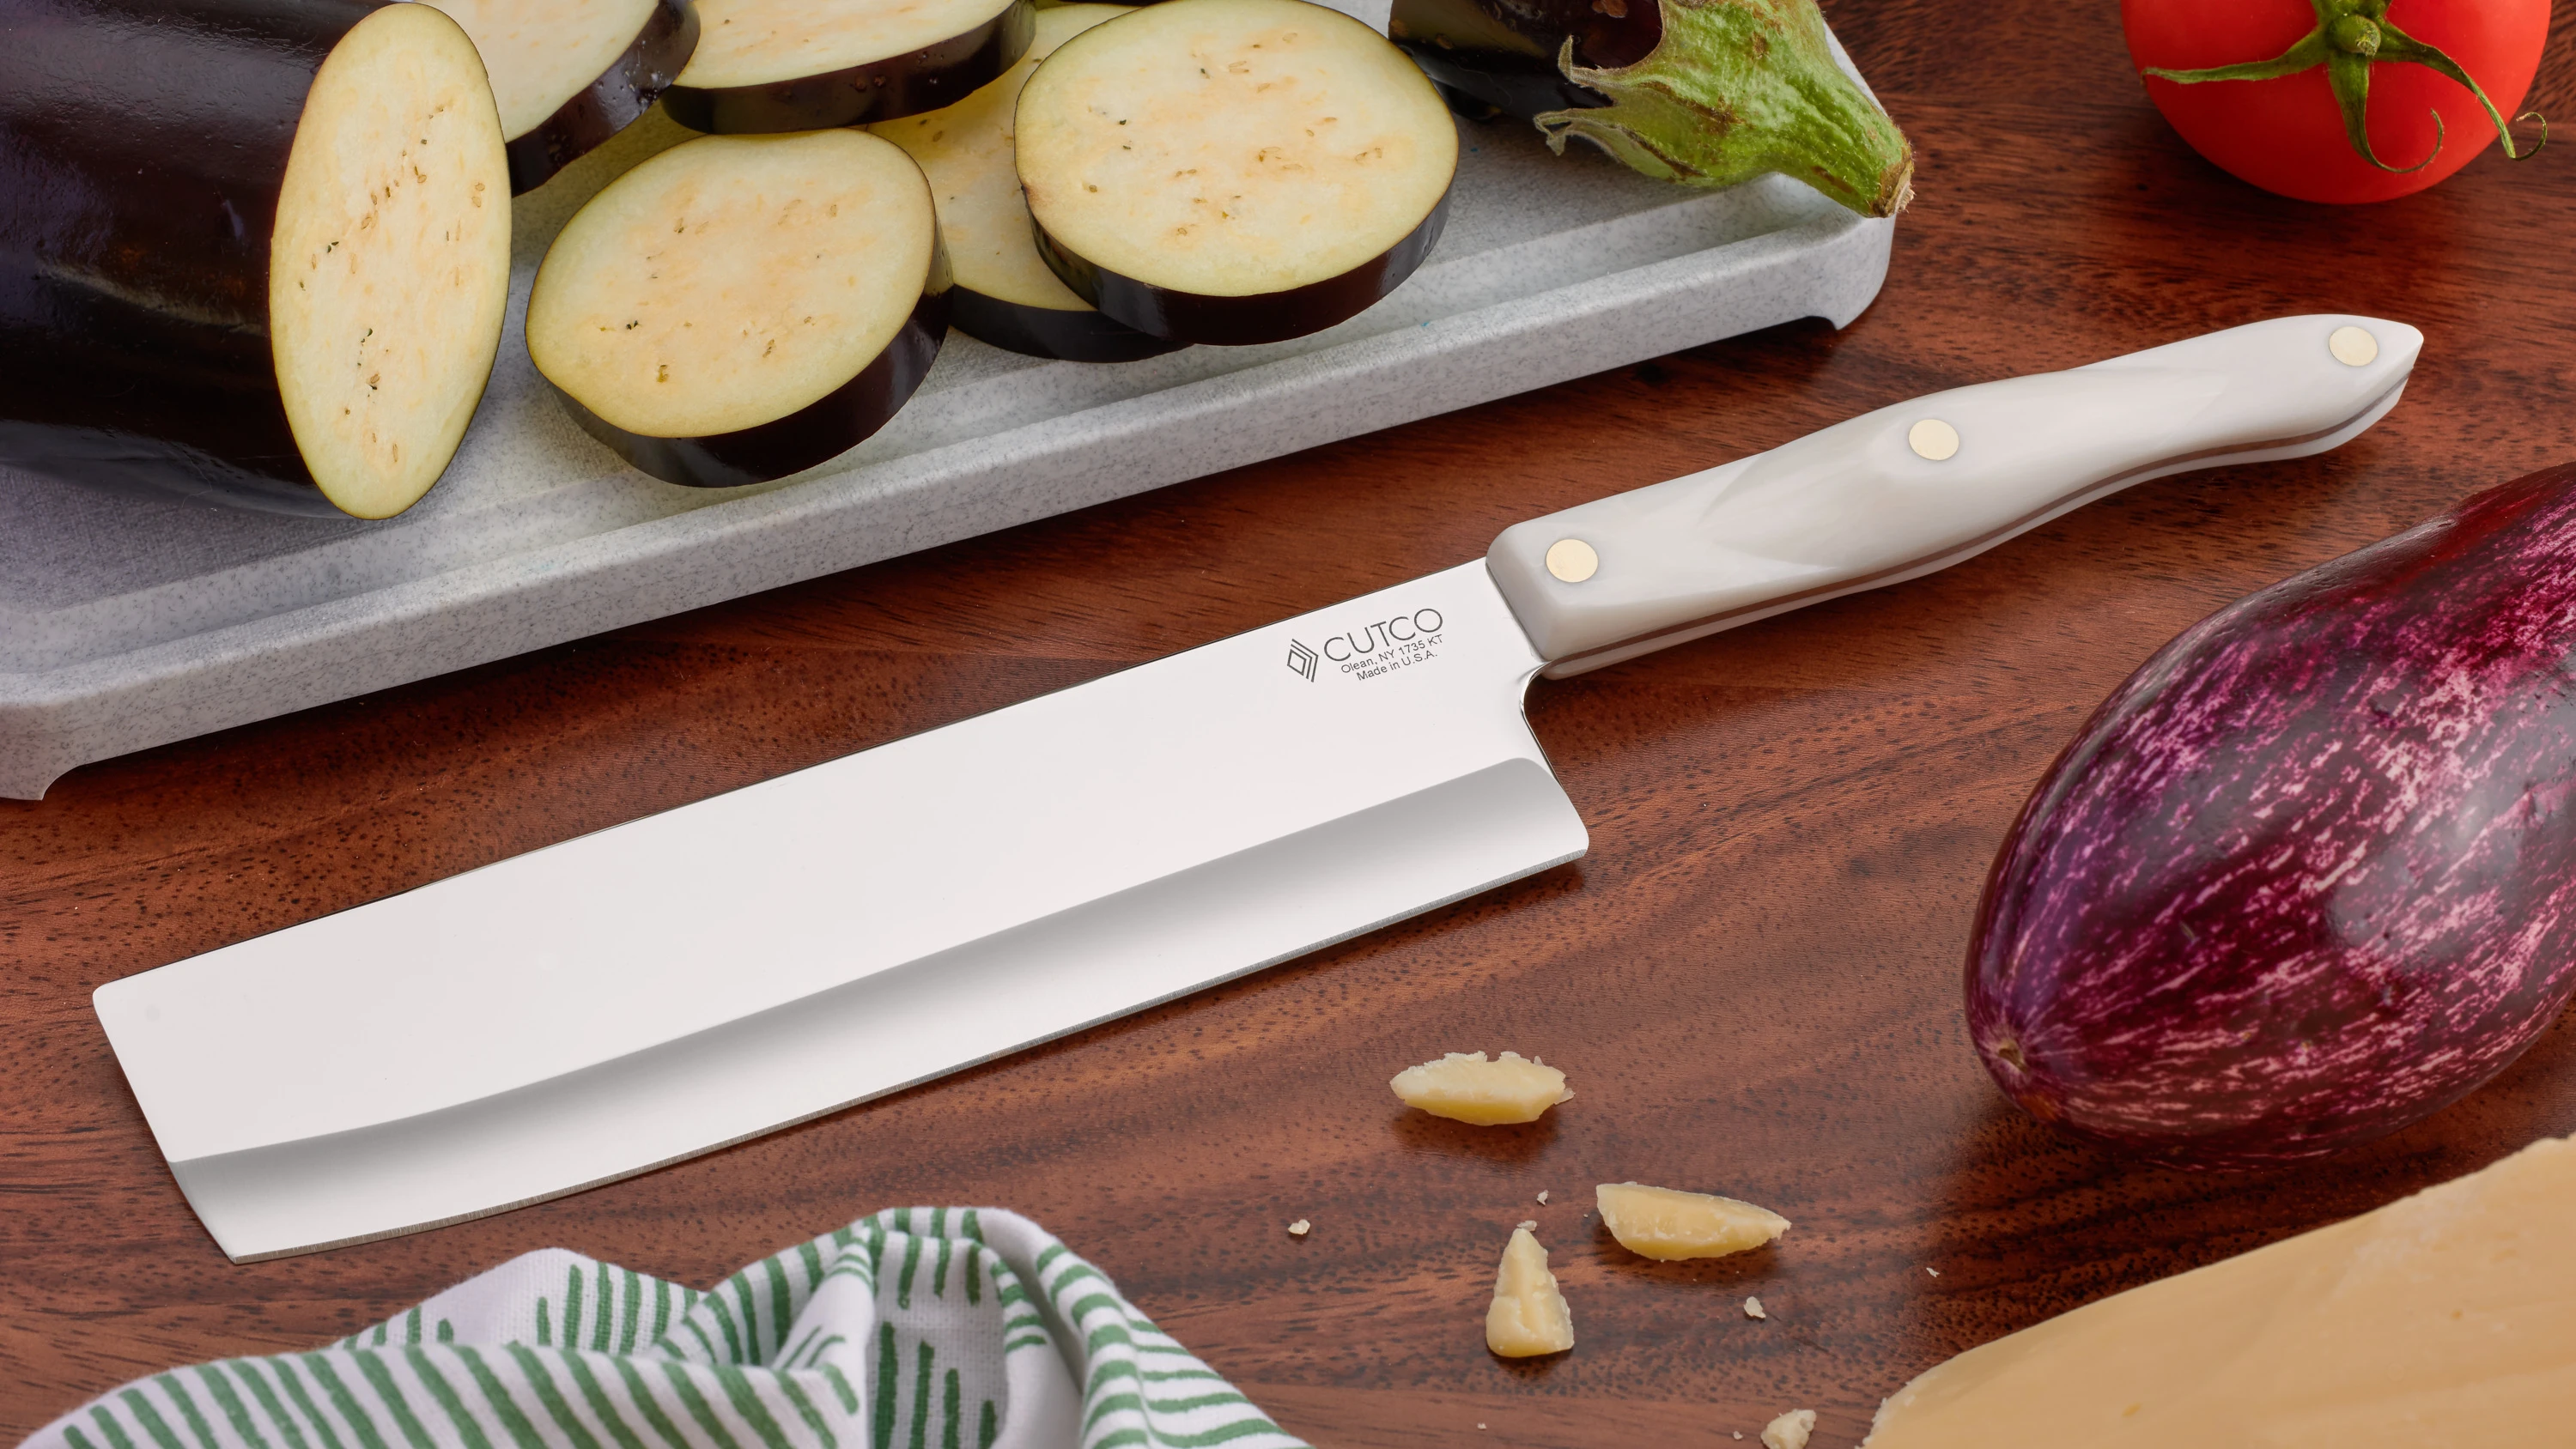 Cutco Cutlery - Strong and versatile, use your Super Shears ✂️ in the  kitchen, garden and beyond. Cut everything from delicate herbs 🌿 to tough  packaging. Plus, the heavy-duty blades come apart